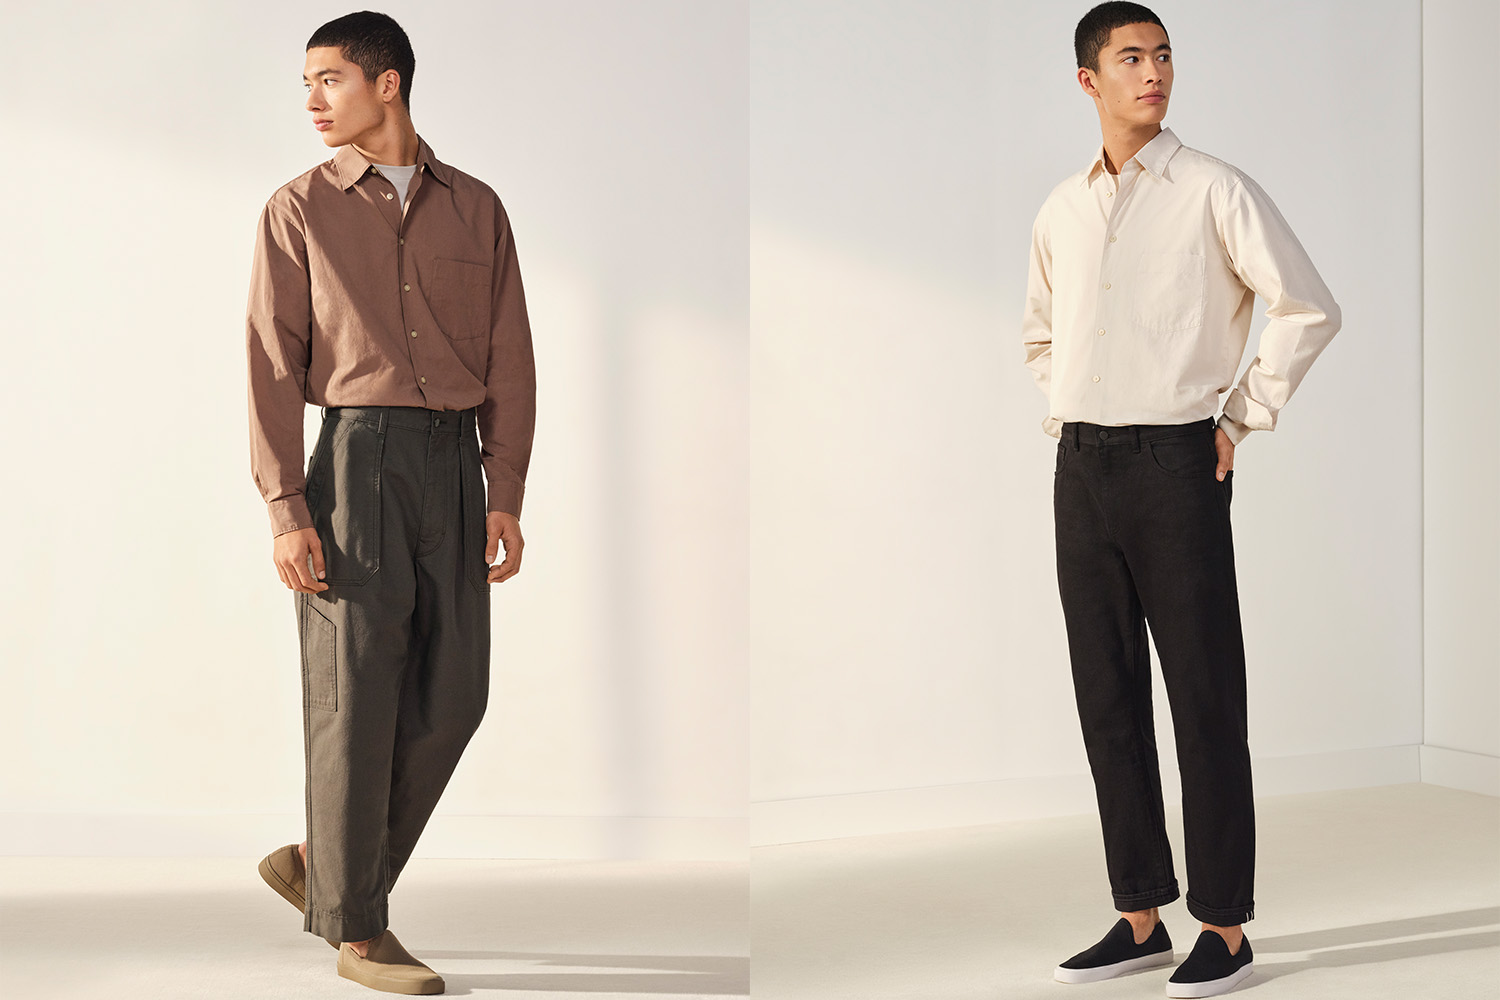 tow looks from the Uniqlo S/S22 campaign